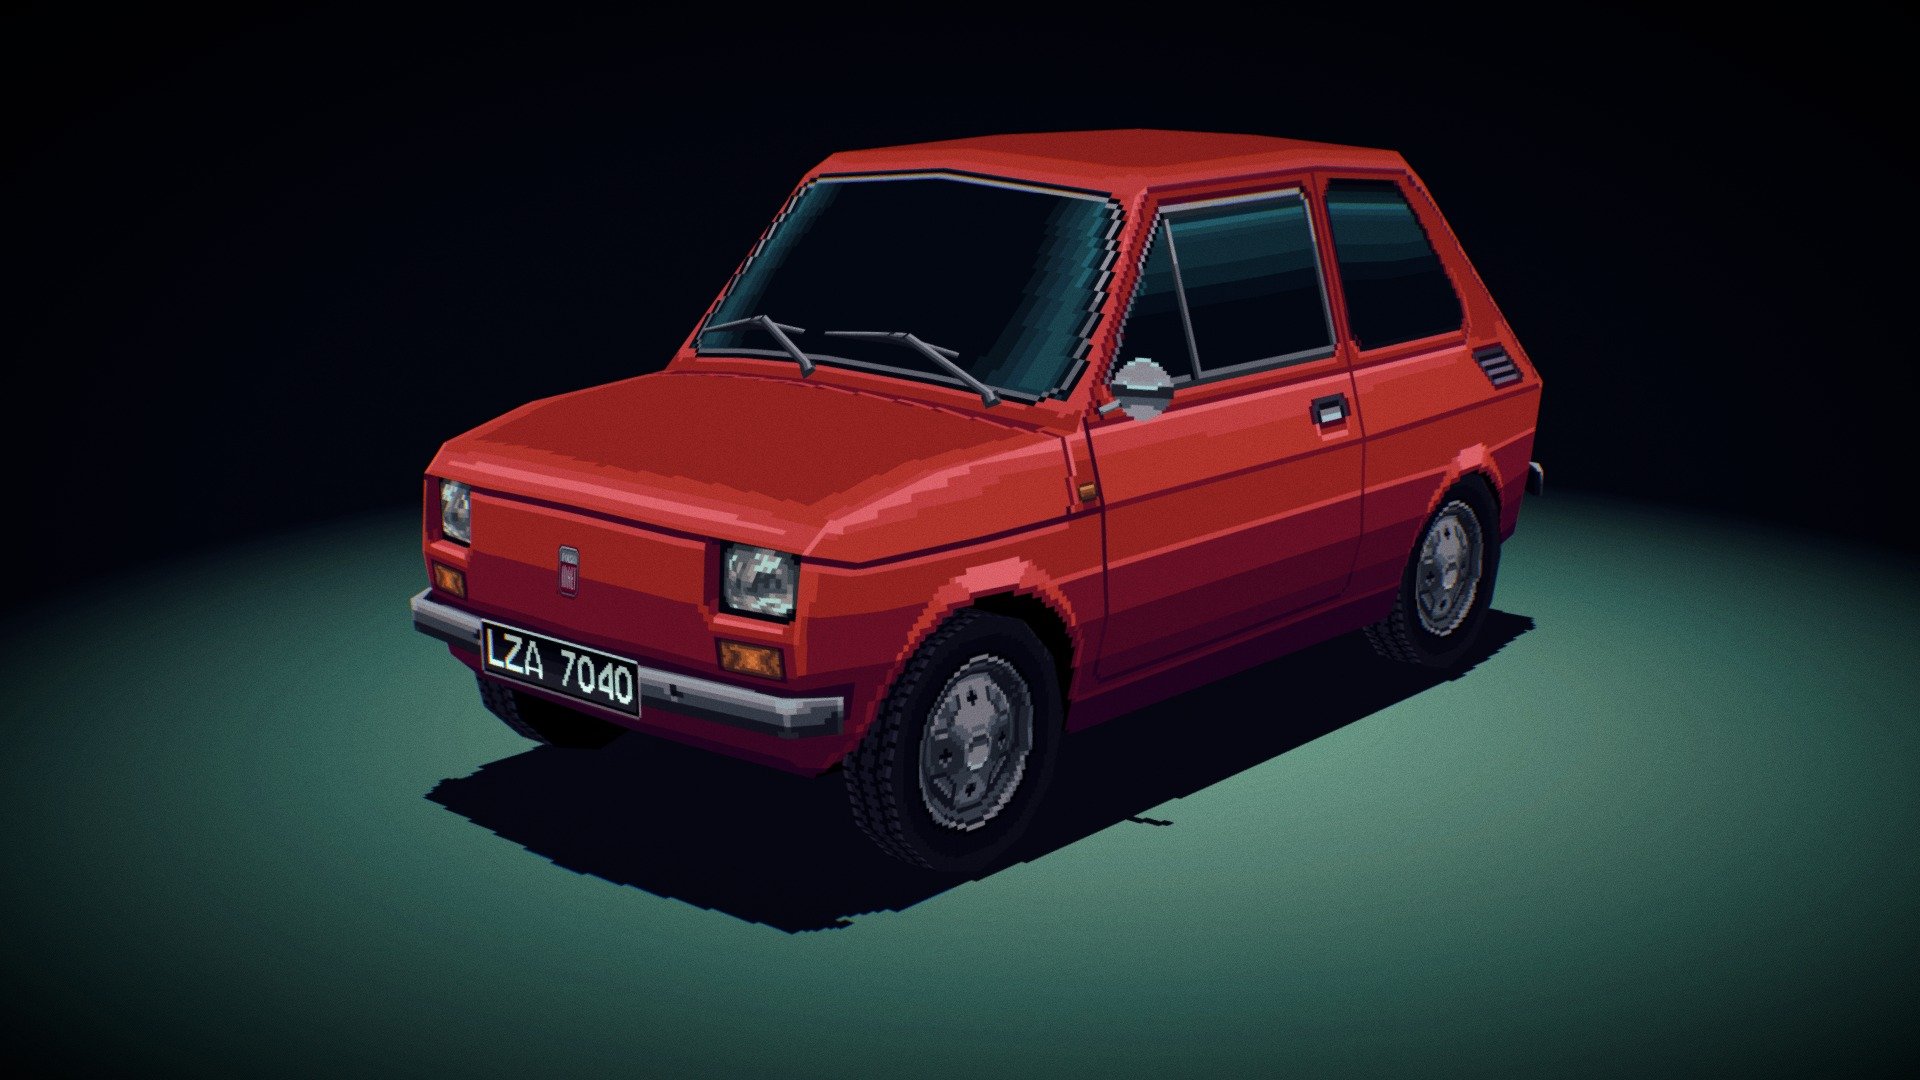 Model for the upcoming game Eastern European driving game titled &ldquo;Szrot”!
Follow the development on twitter:
https://twitter.com/NorthernGus

Join us on the Szrot development discord!: https://discord.gg/cAZwEaQR

The Fiat 126p, often nicknamed &ldquo;Maluch